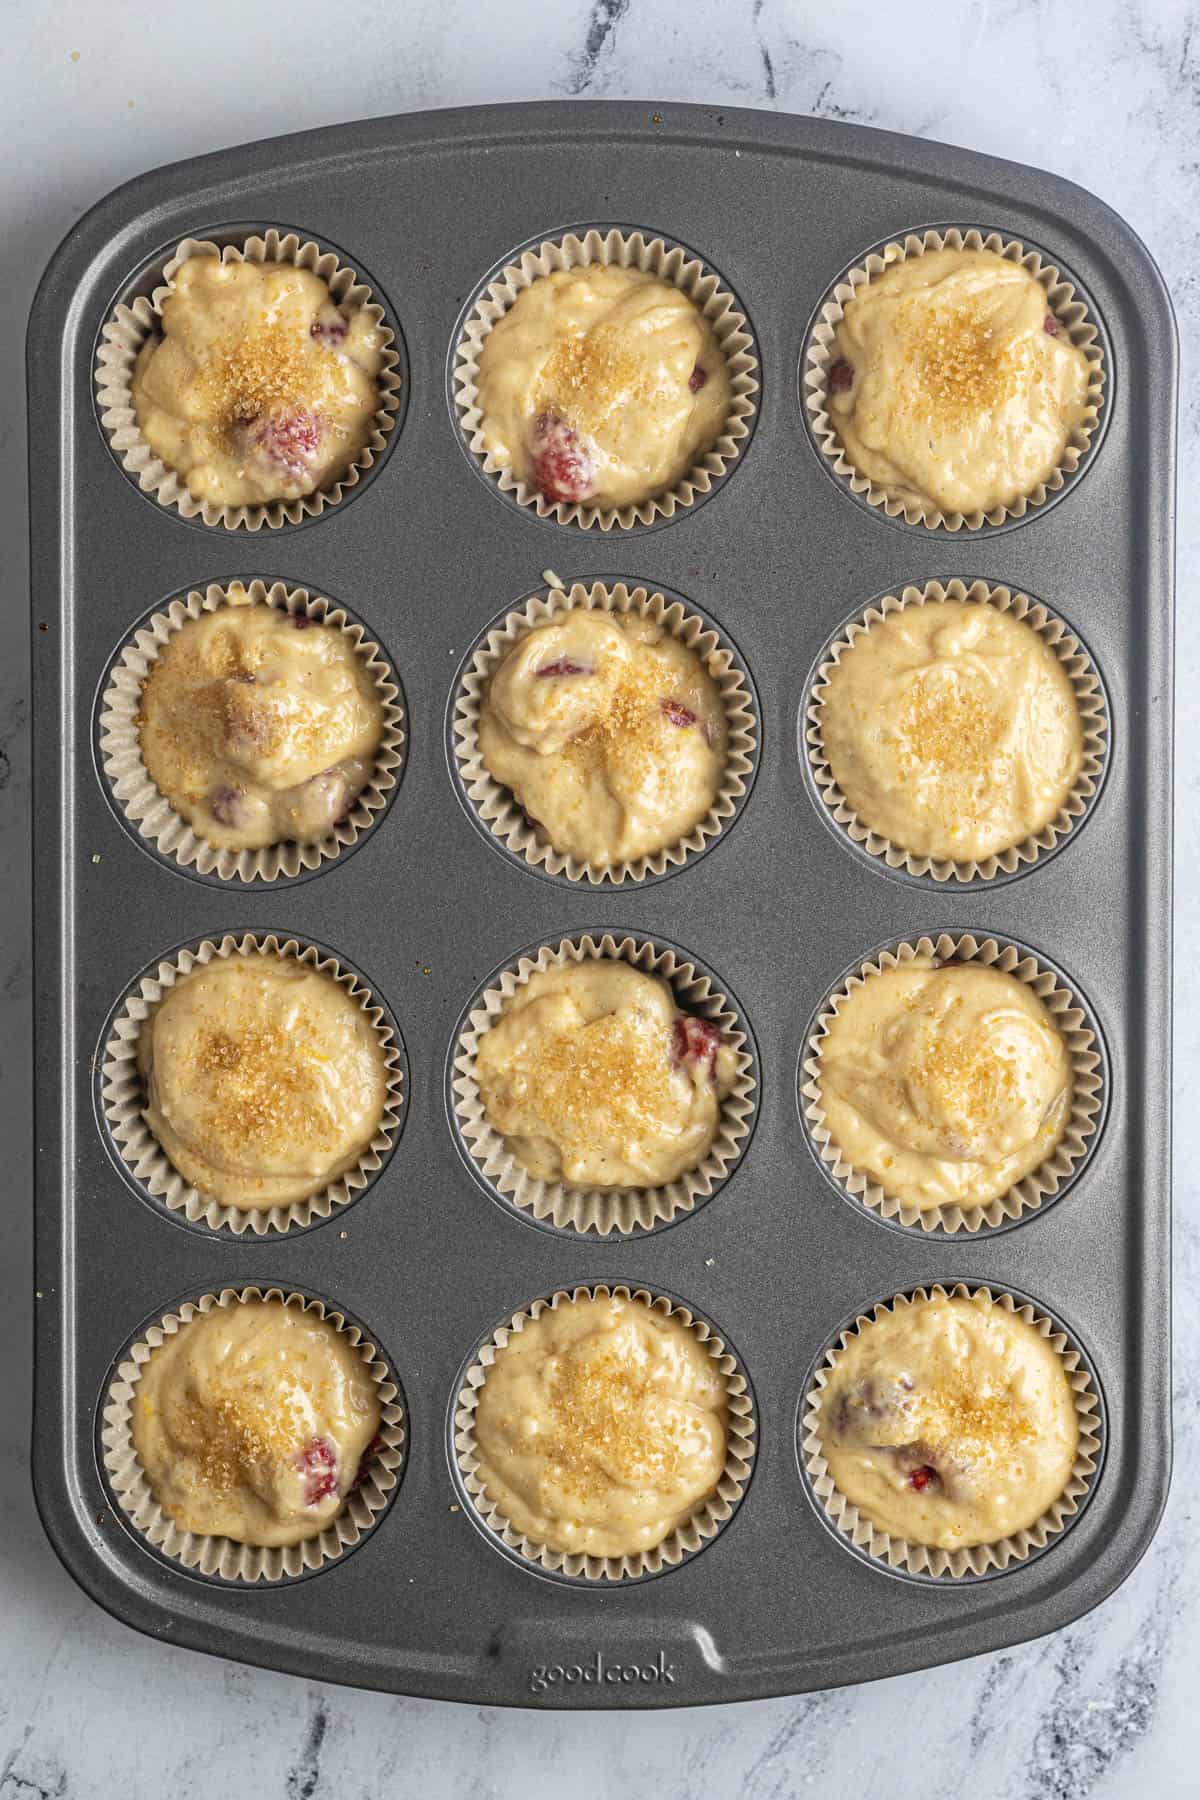 This image shows the muffin batter once it's been divided in the muffin pans. The Gluten Free Raspberry Muffins have been lightly sprinkled with coarse sugar.